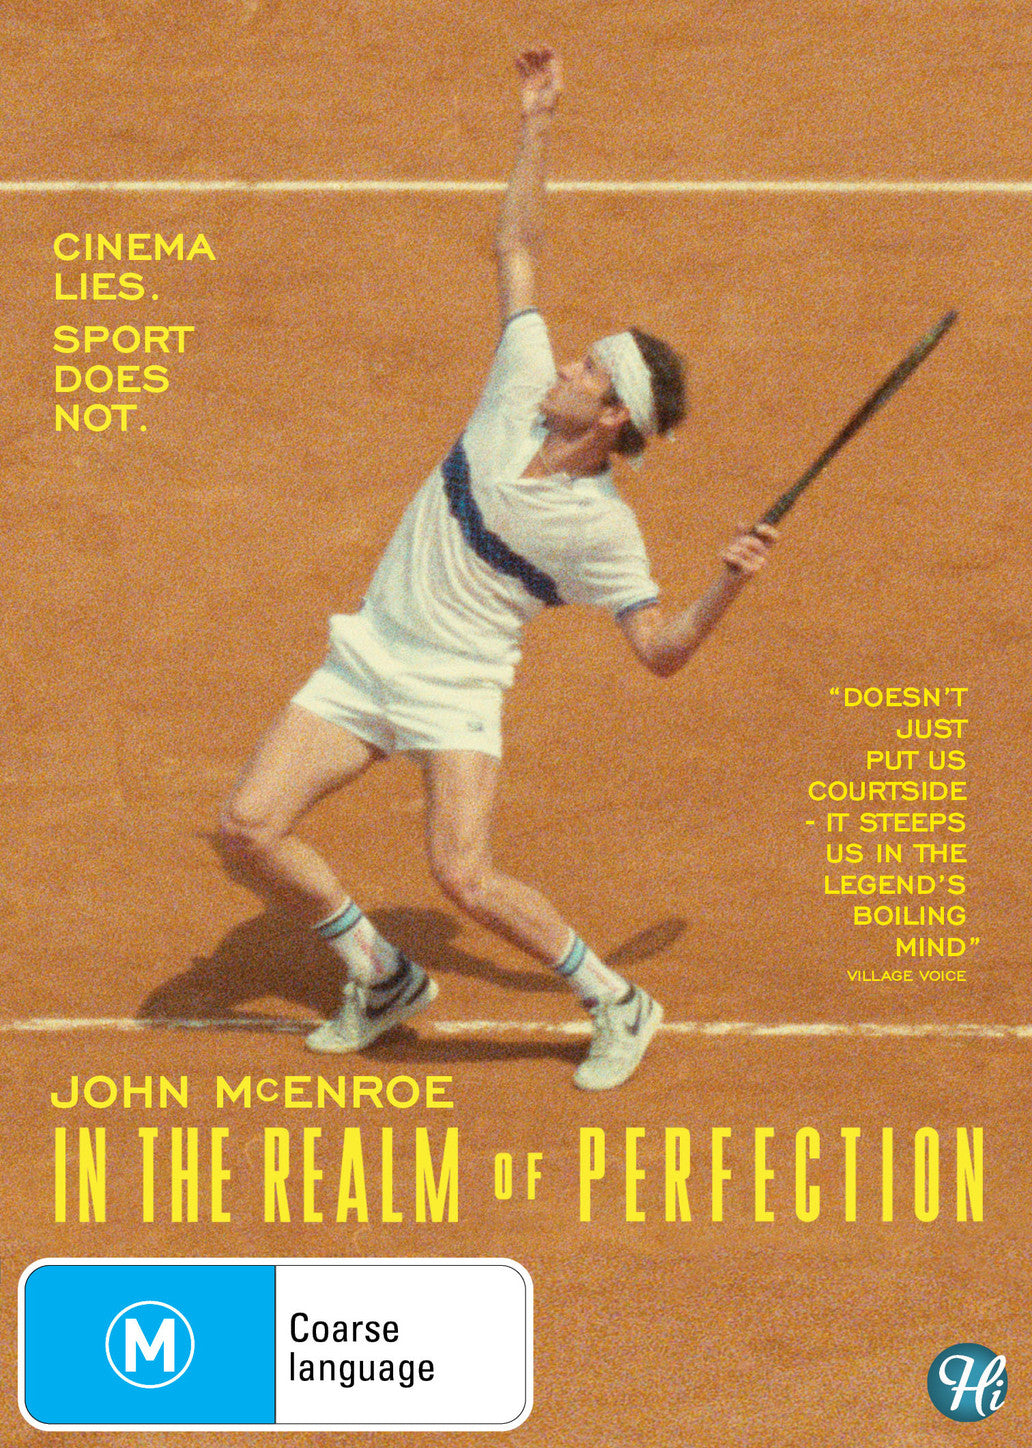 JOHN MCENROE: IN THE REALM OF PERFECTION